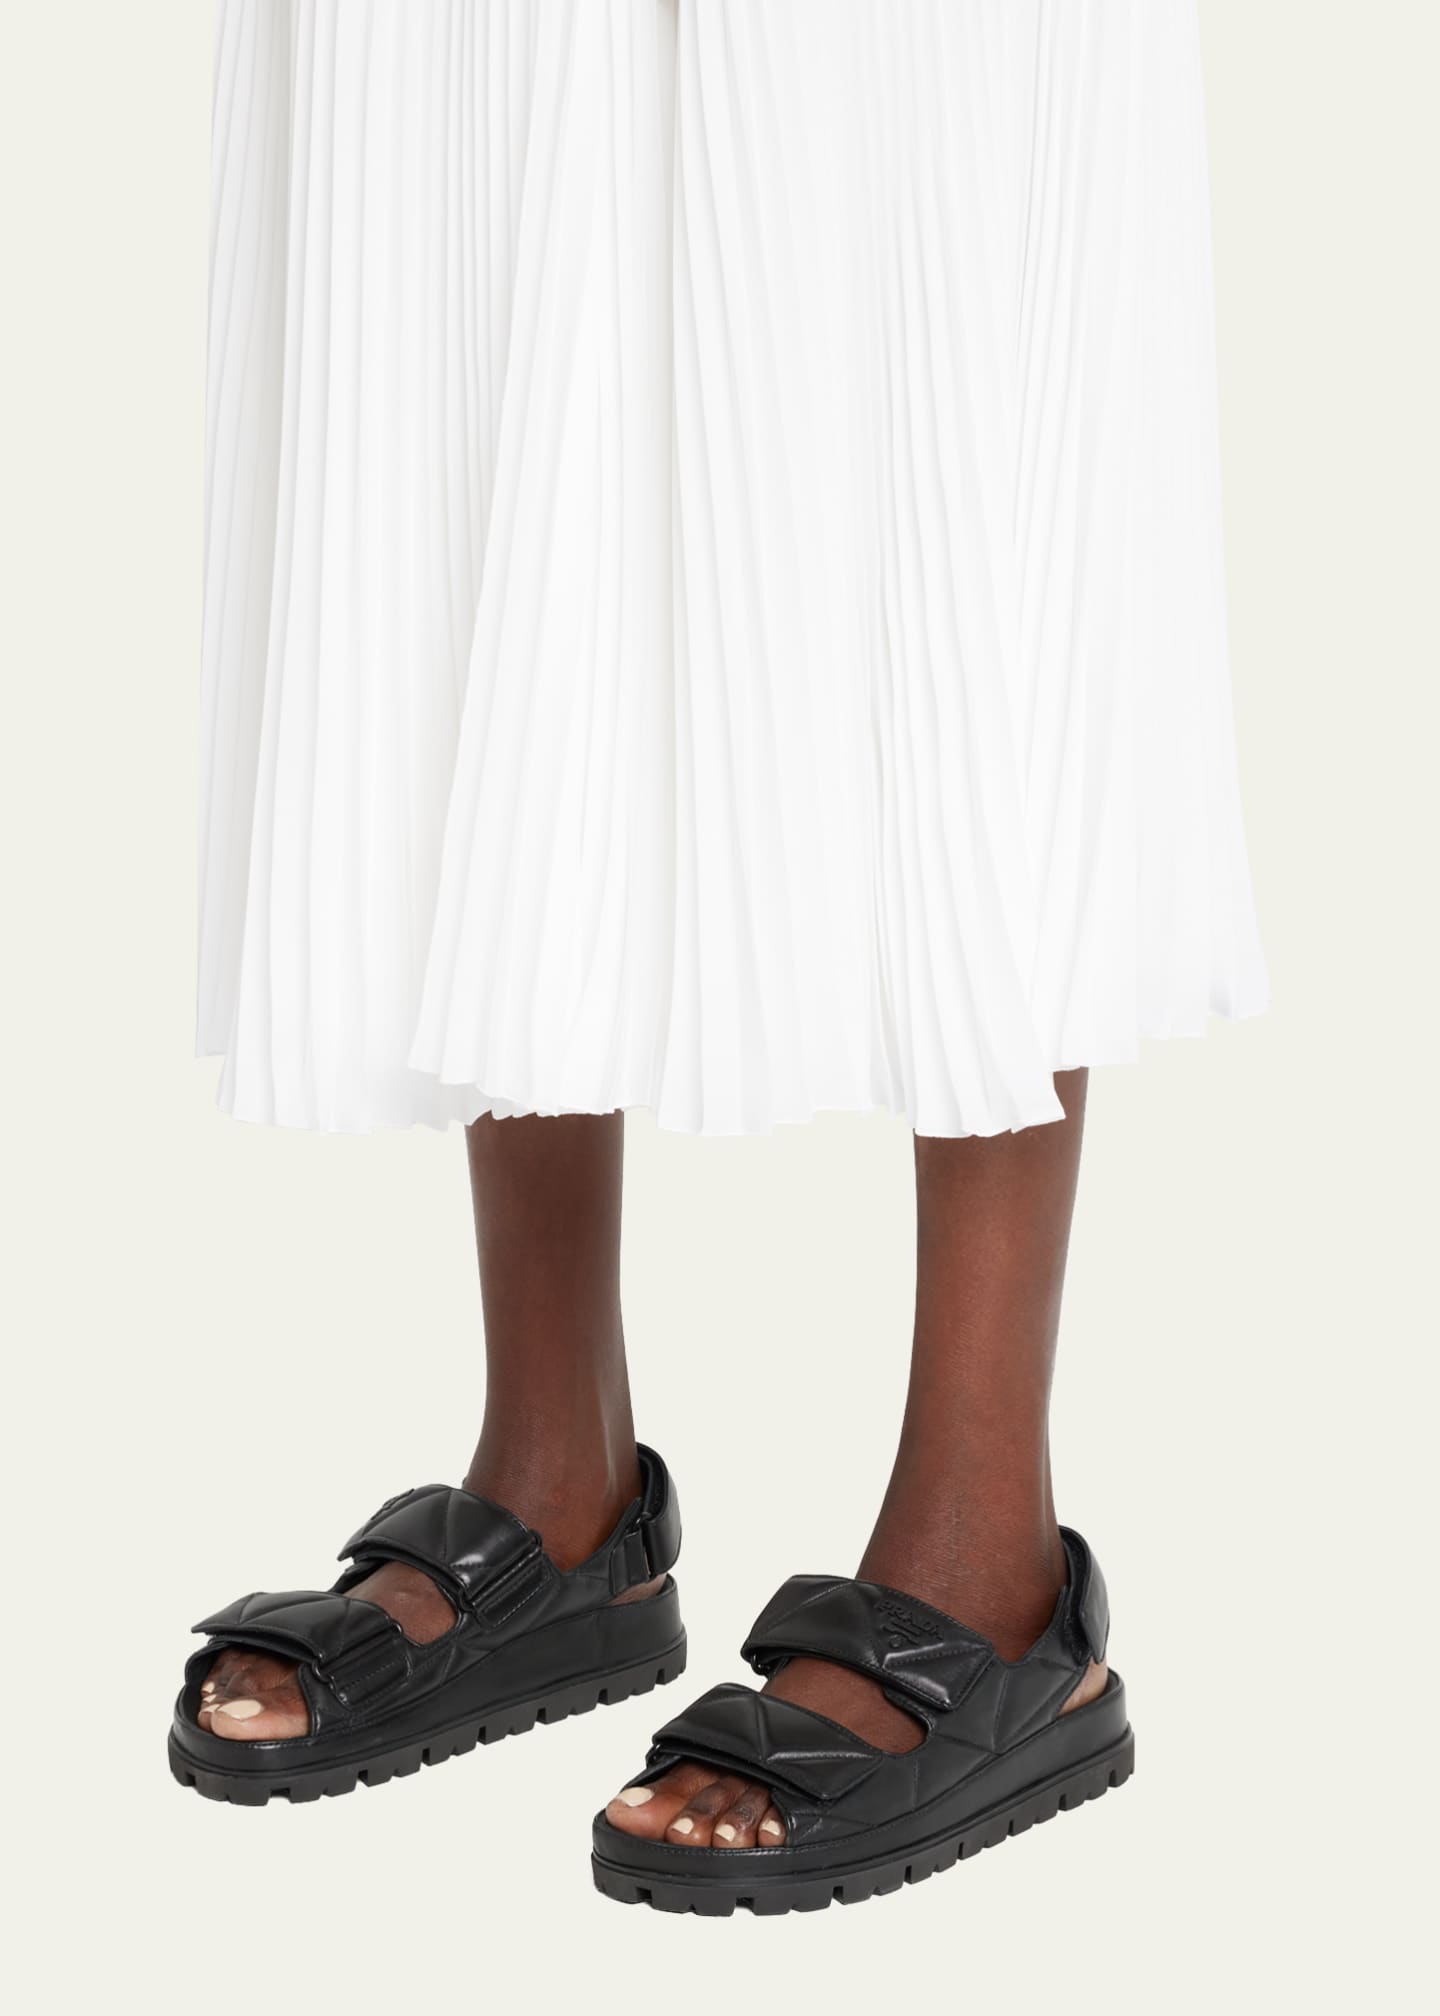 Prada Quilted Leather Slingback Sporty Sandals - Bergdorf Goodman